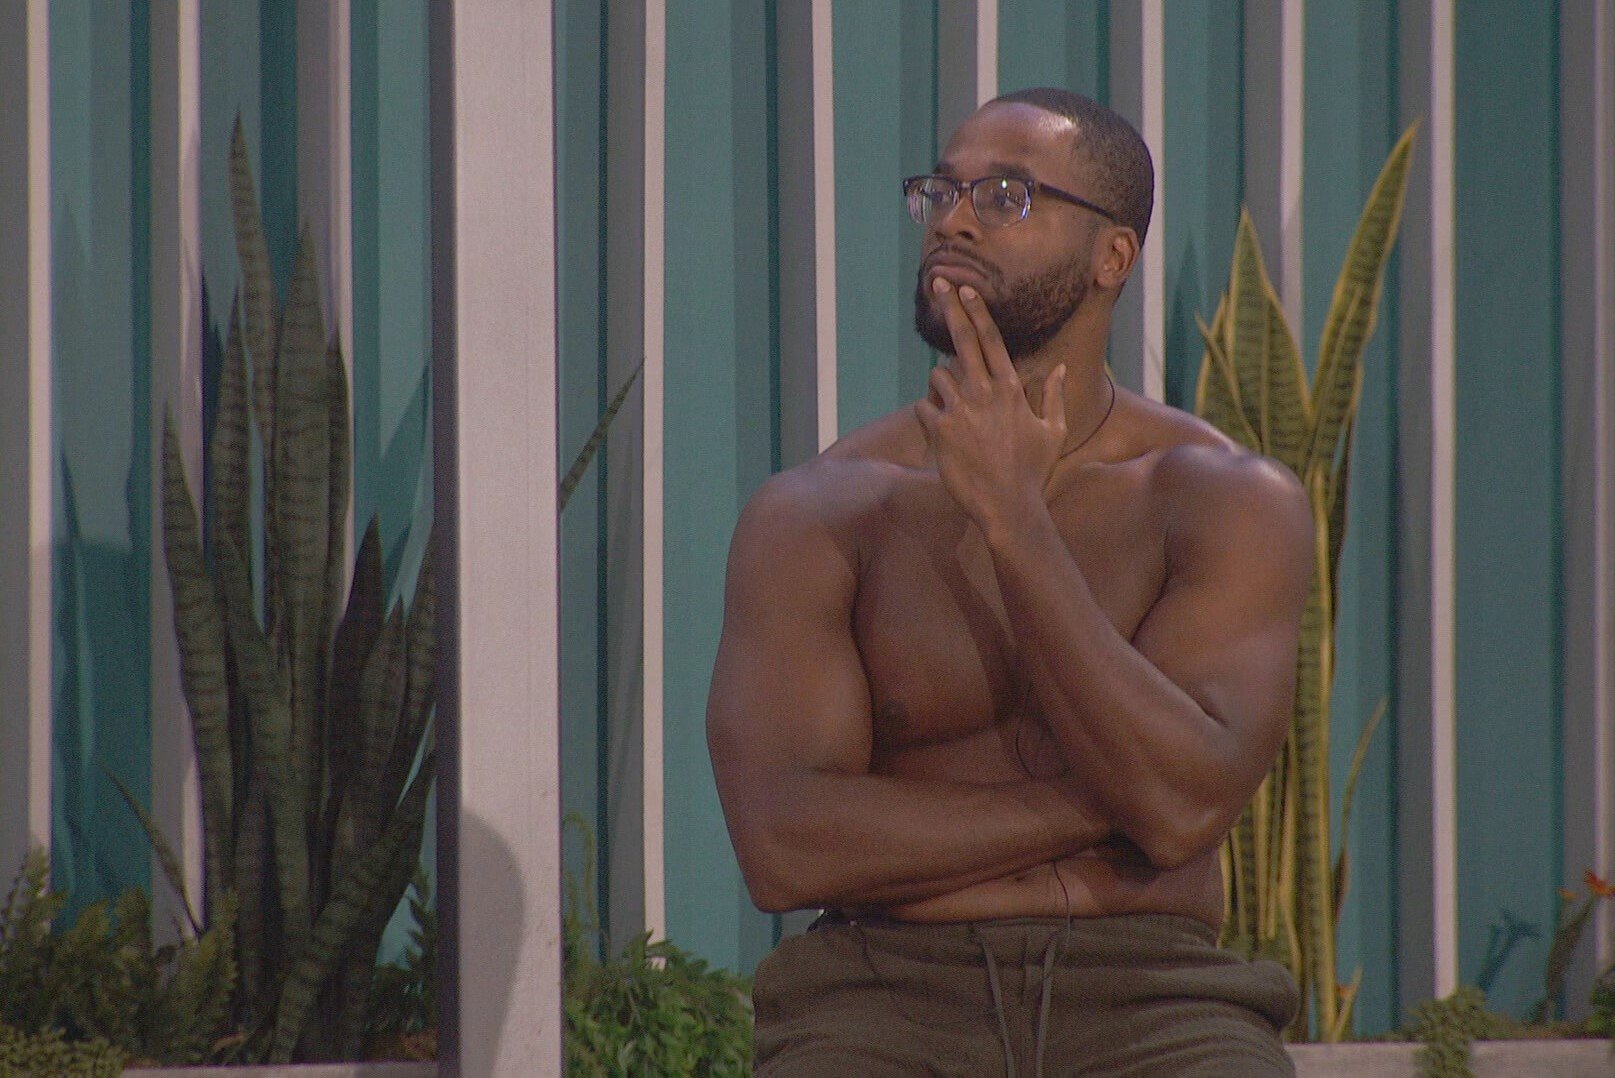 Monte Taylor, who competed in the final Power of Veto competition of 'Big Brother 24' on CBS, is shirtless, only wearing brown sweatpants and glasses.